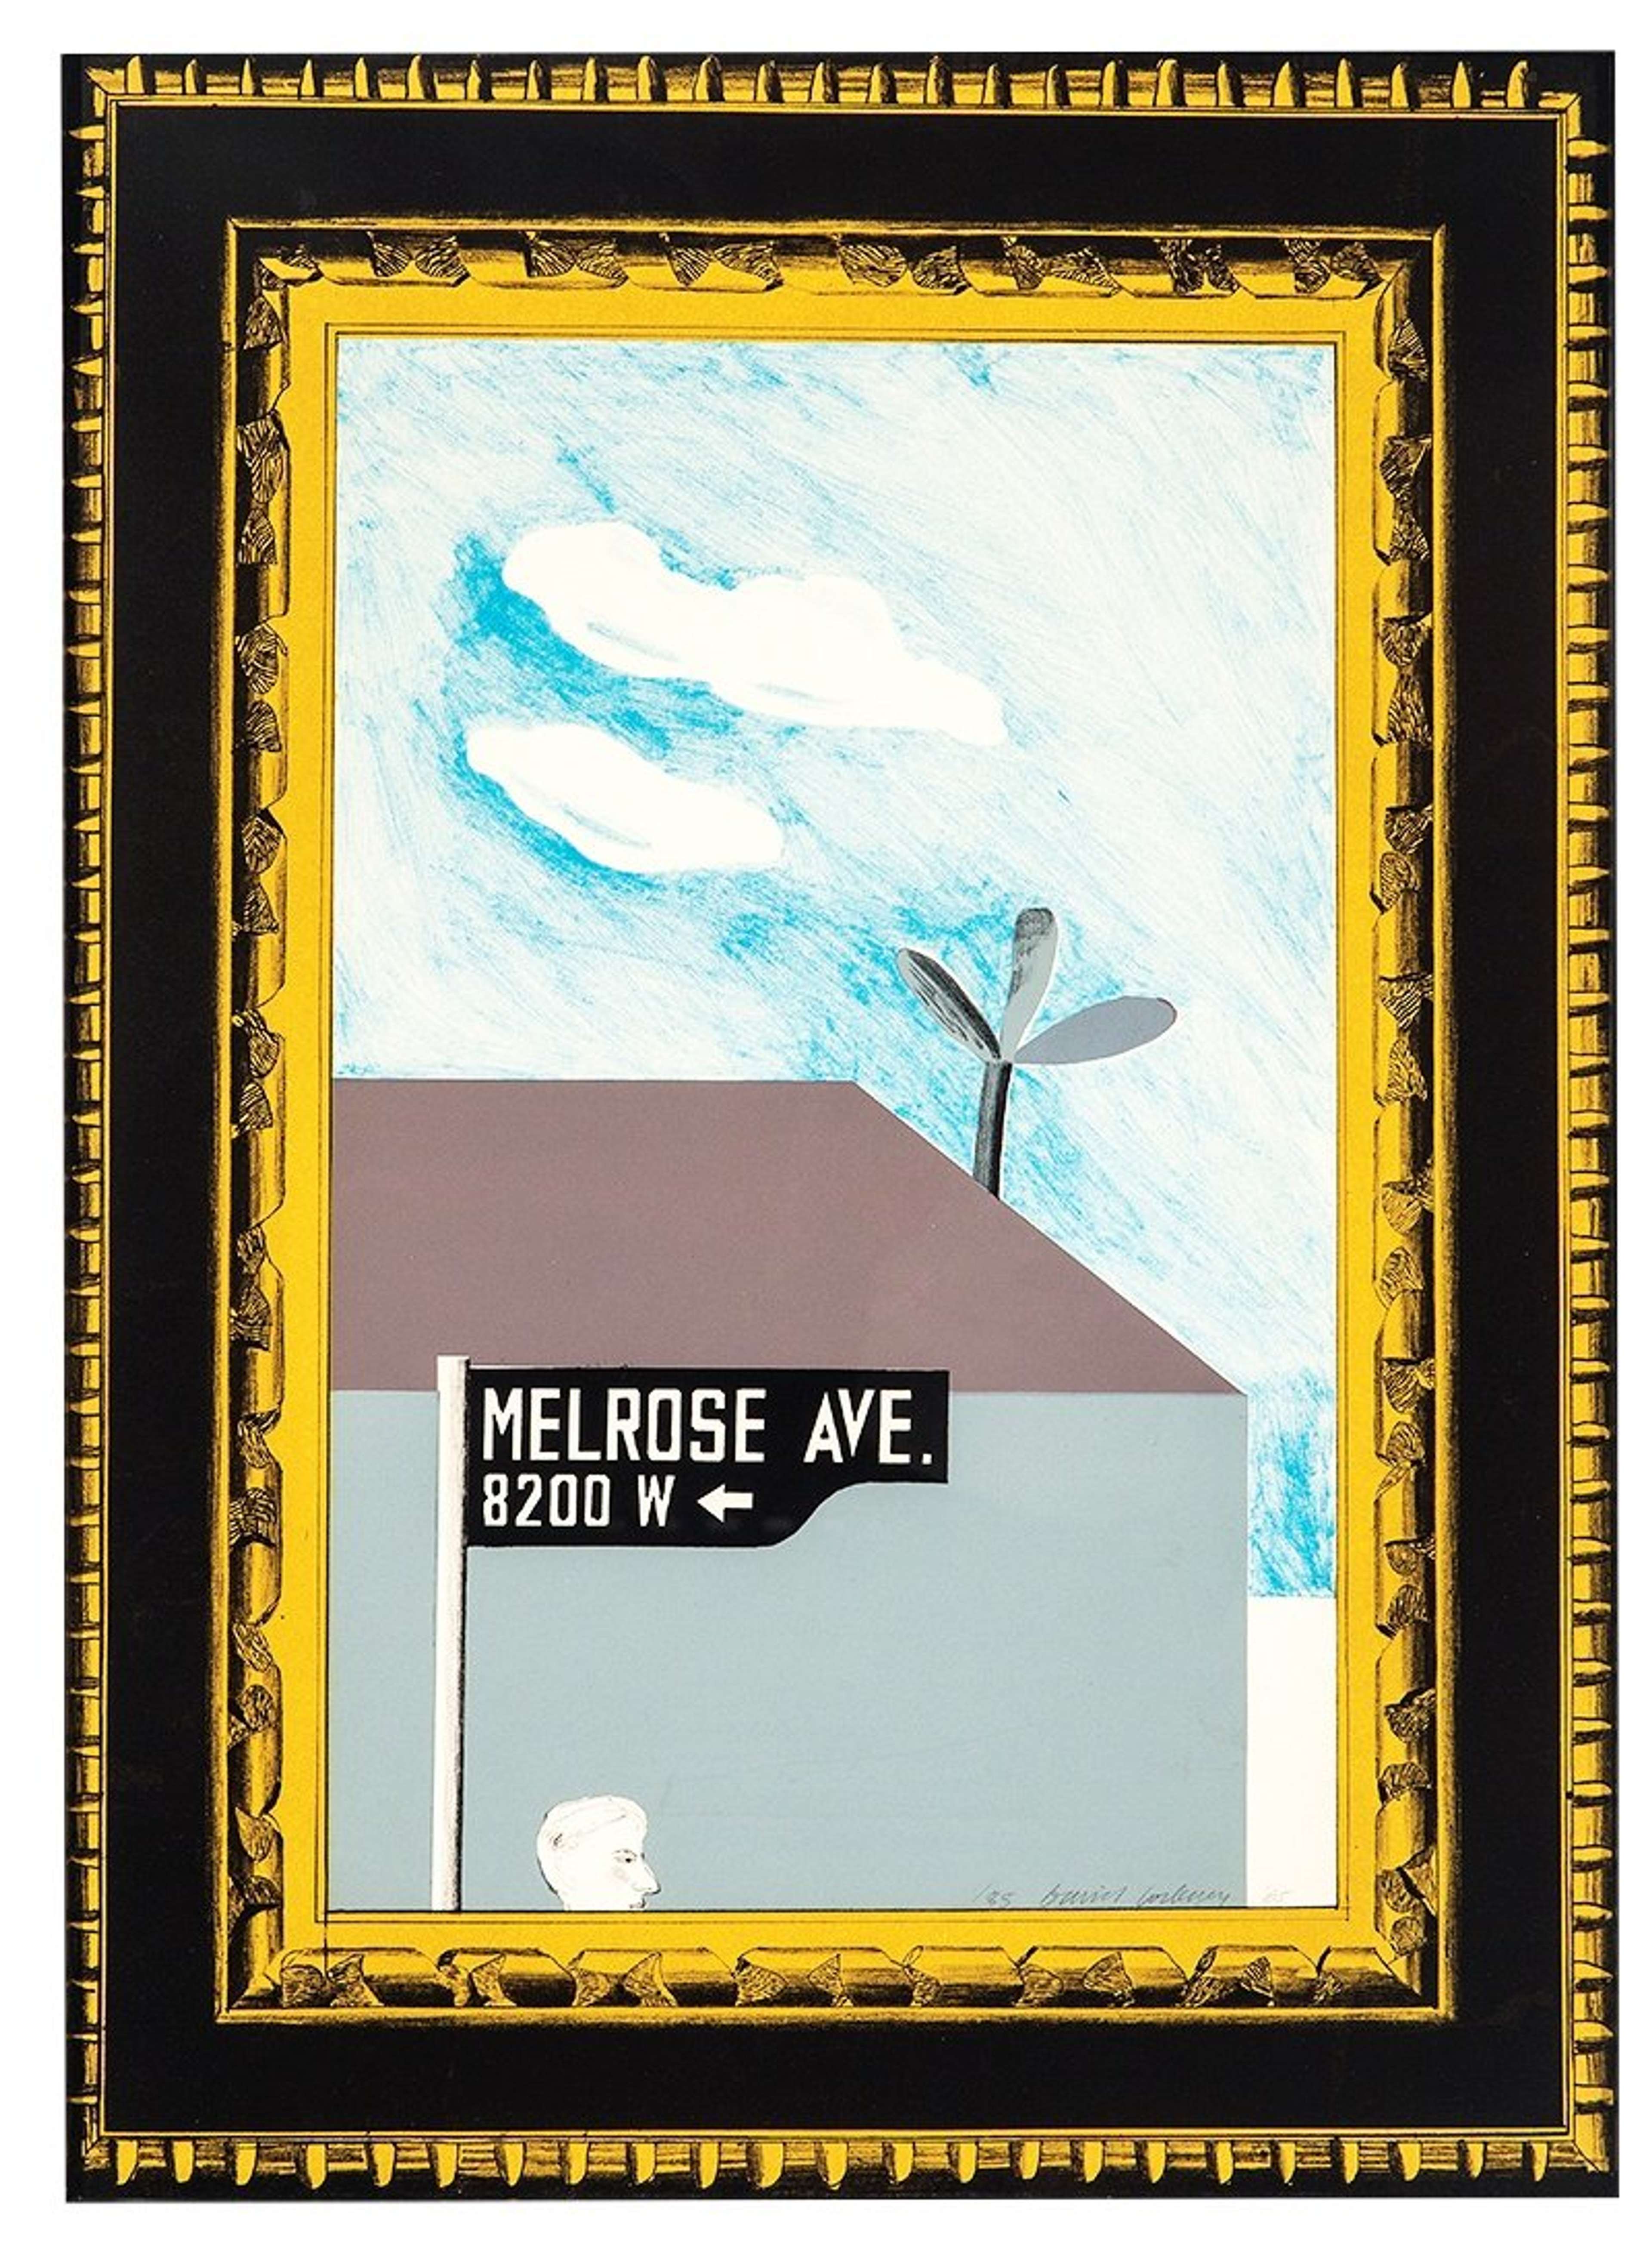 Picture Of Melrose Avenue In An Ornate Gold Frame